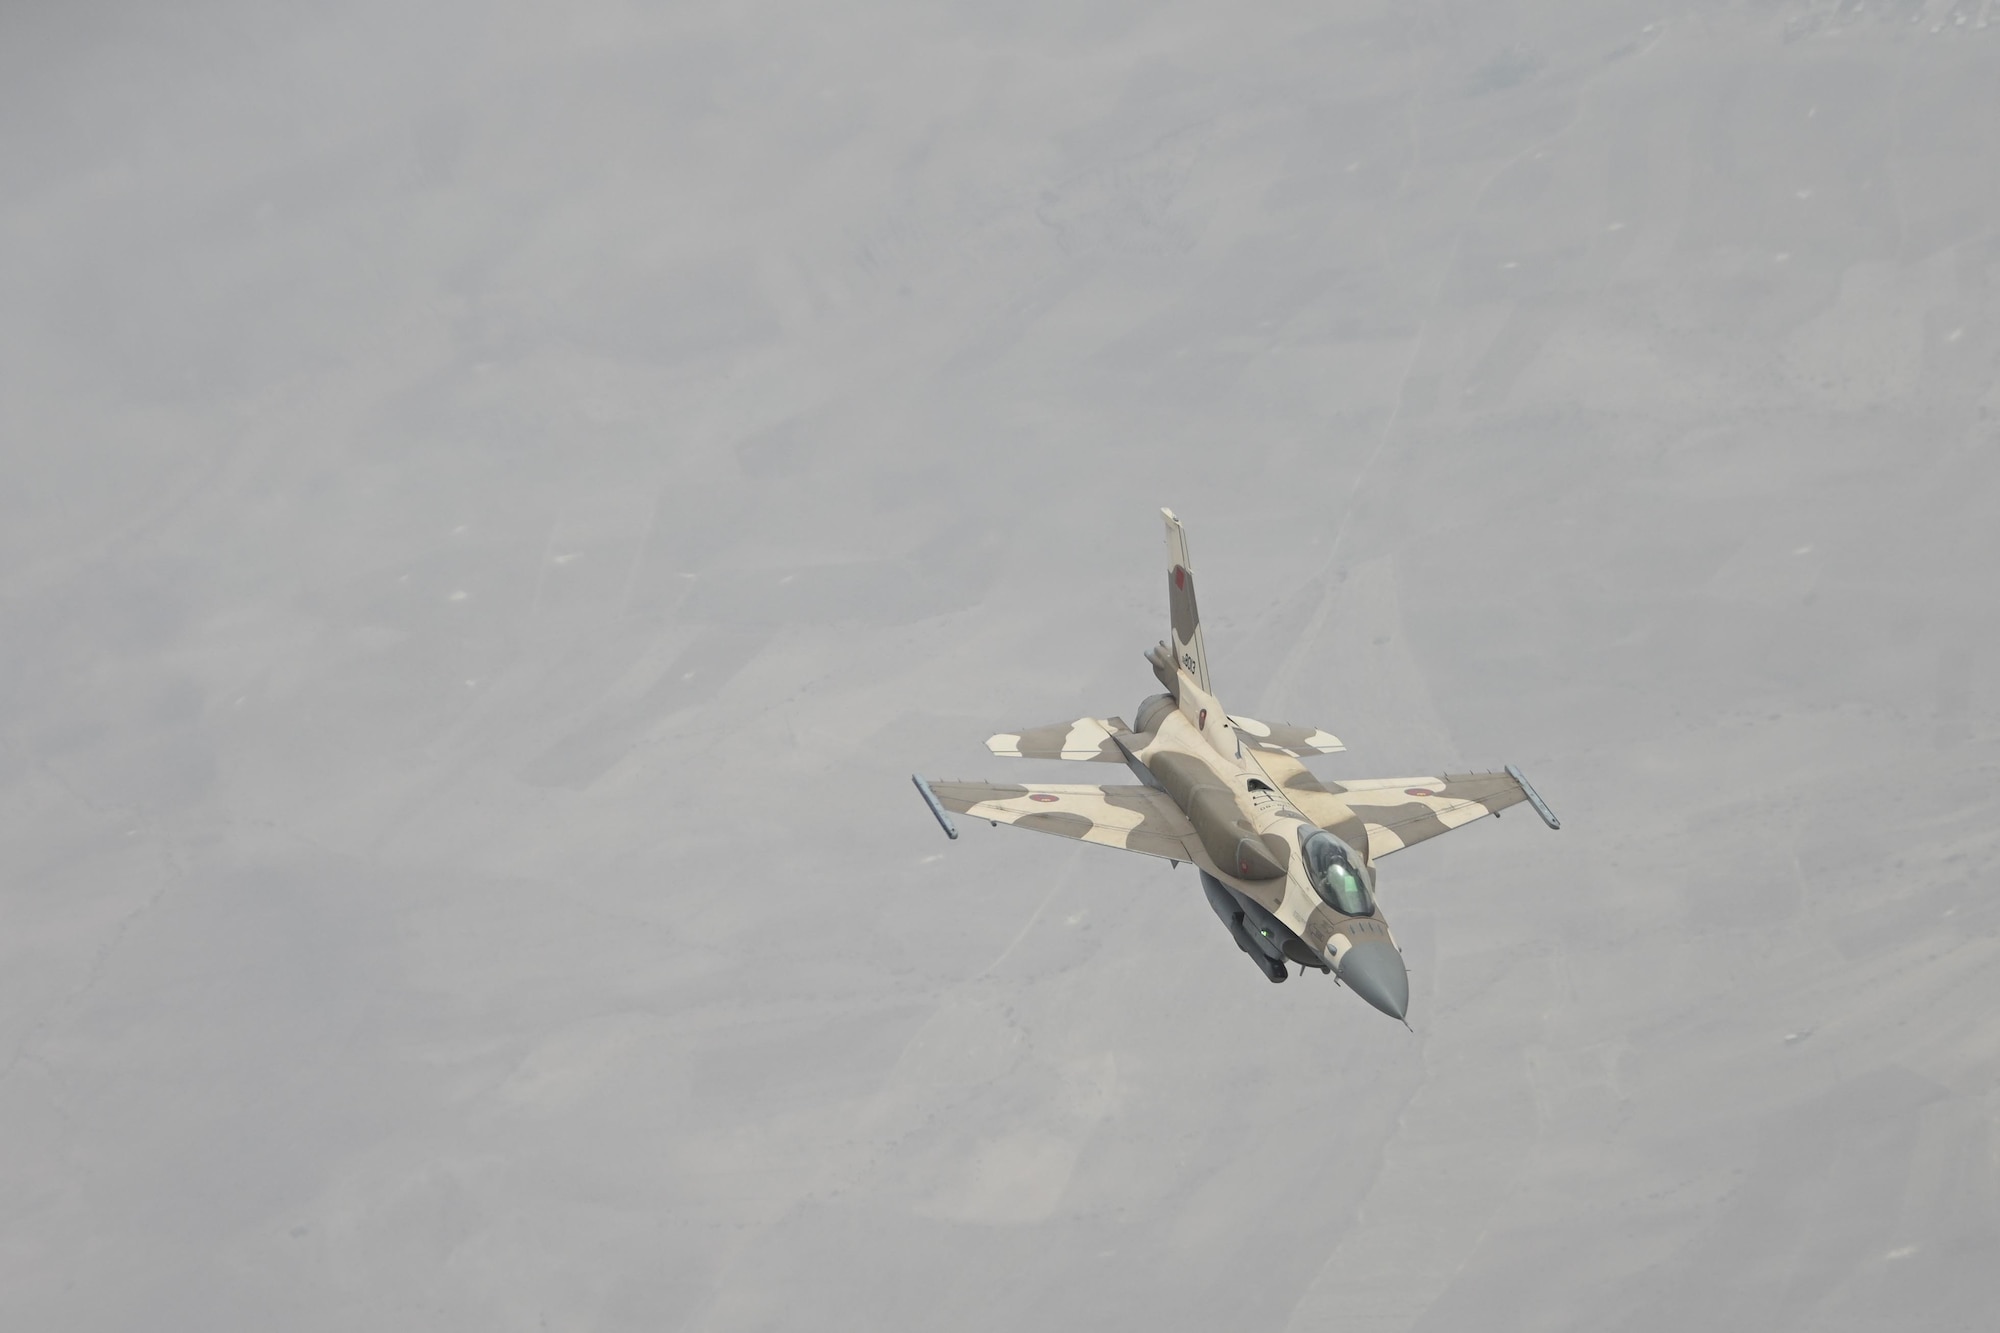 A Royal Moroccan Air Force F-16 Fighting Falcon aircraft flies over Morocco during Exercise African Lion 2021, June 15, 2021. African Lion enhances cooperation on regional security through large-force training exercises that enhance interoperability. 



African Lion is U.S. Africa Command's largest, premier, joint, annual exercise hosted by Morocco, Tunisia and Senegal, 7-18 June. More than 7,000 participants from nine nations and NATO train together with a focus on enhancing readiness for U.S. and partner nation forces. African Lion is a multi-domain, multi-component, and multi-national exercise, which employs a full array of mission capabilities with the goal to strengthen interoperability among participants. (U.S. Air Force photo by Senior Airman Joseph Barron)